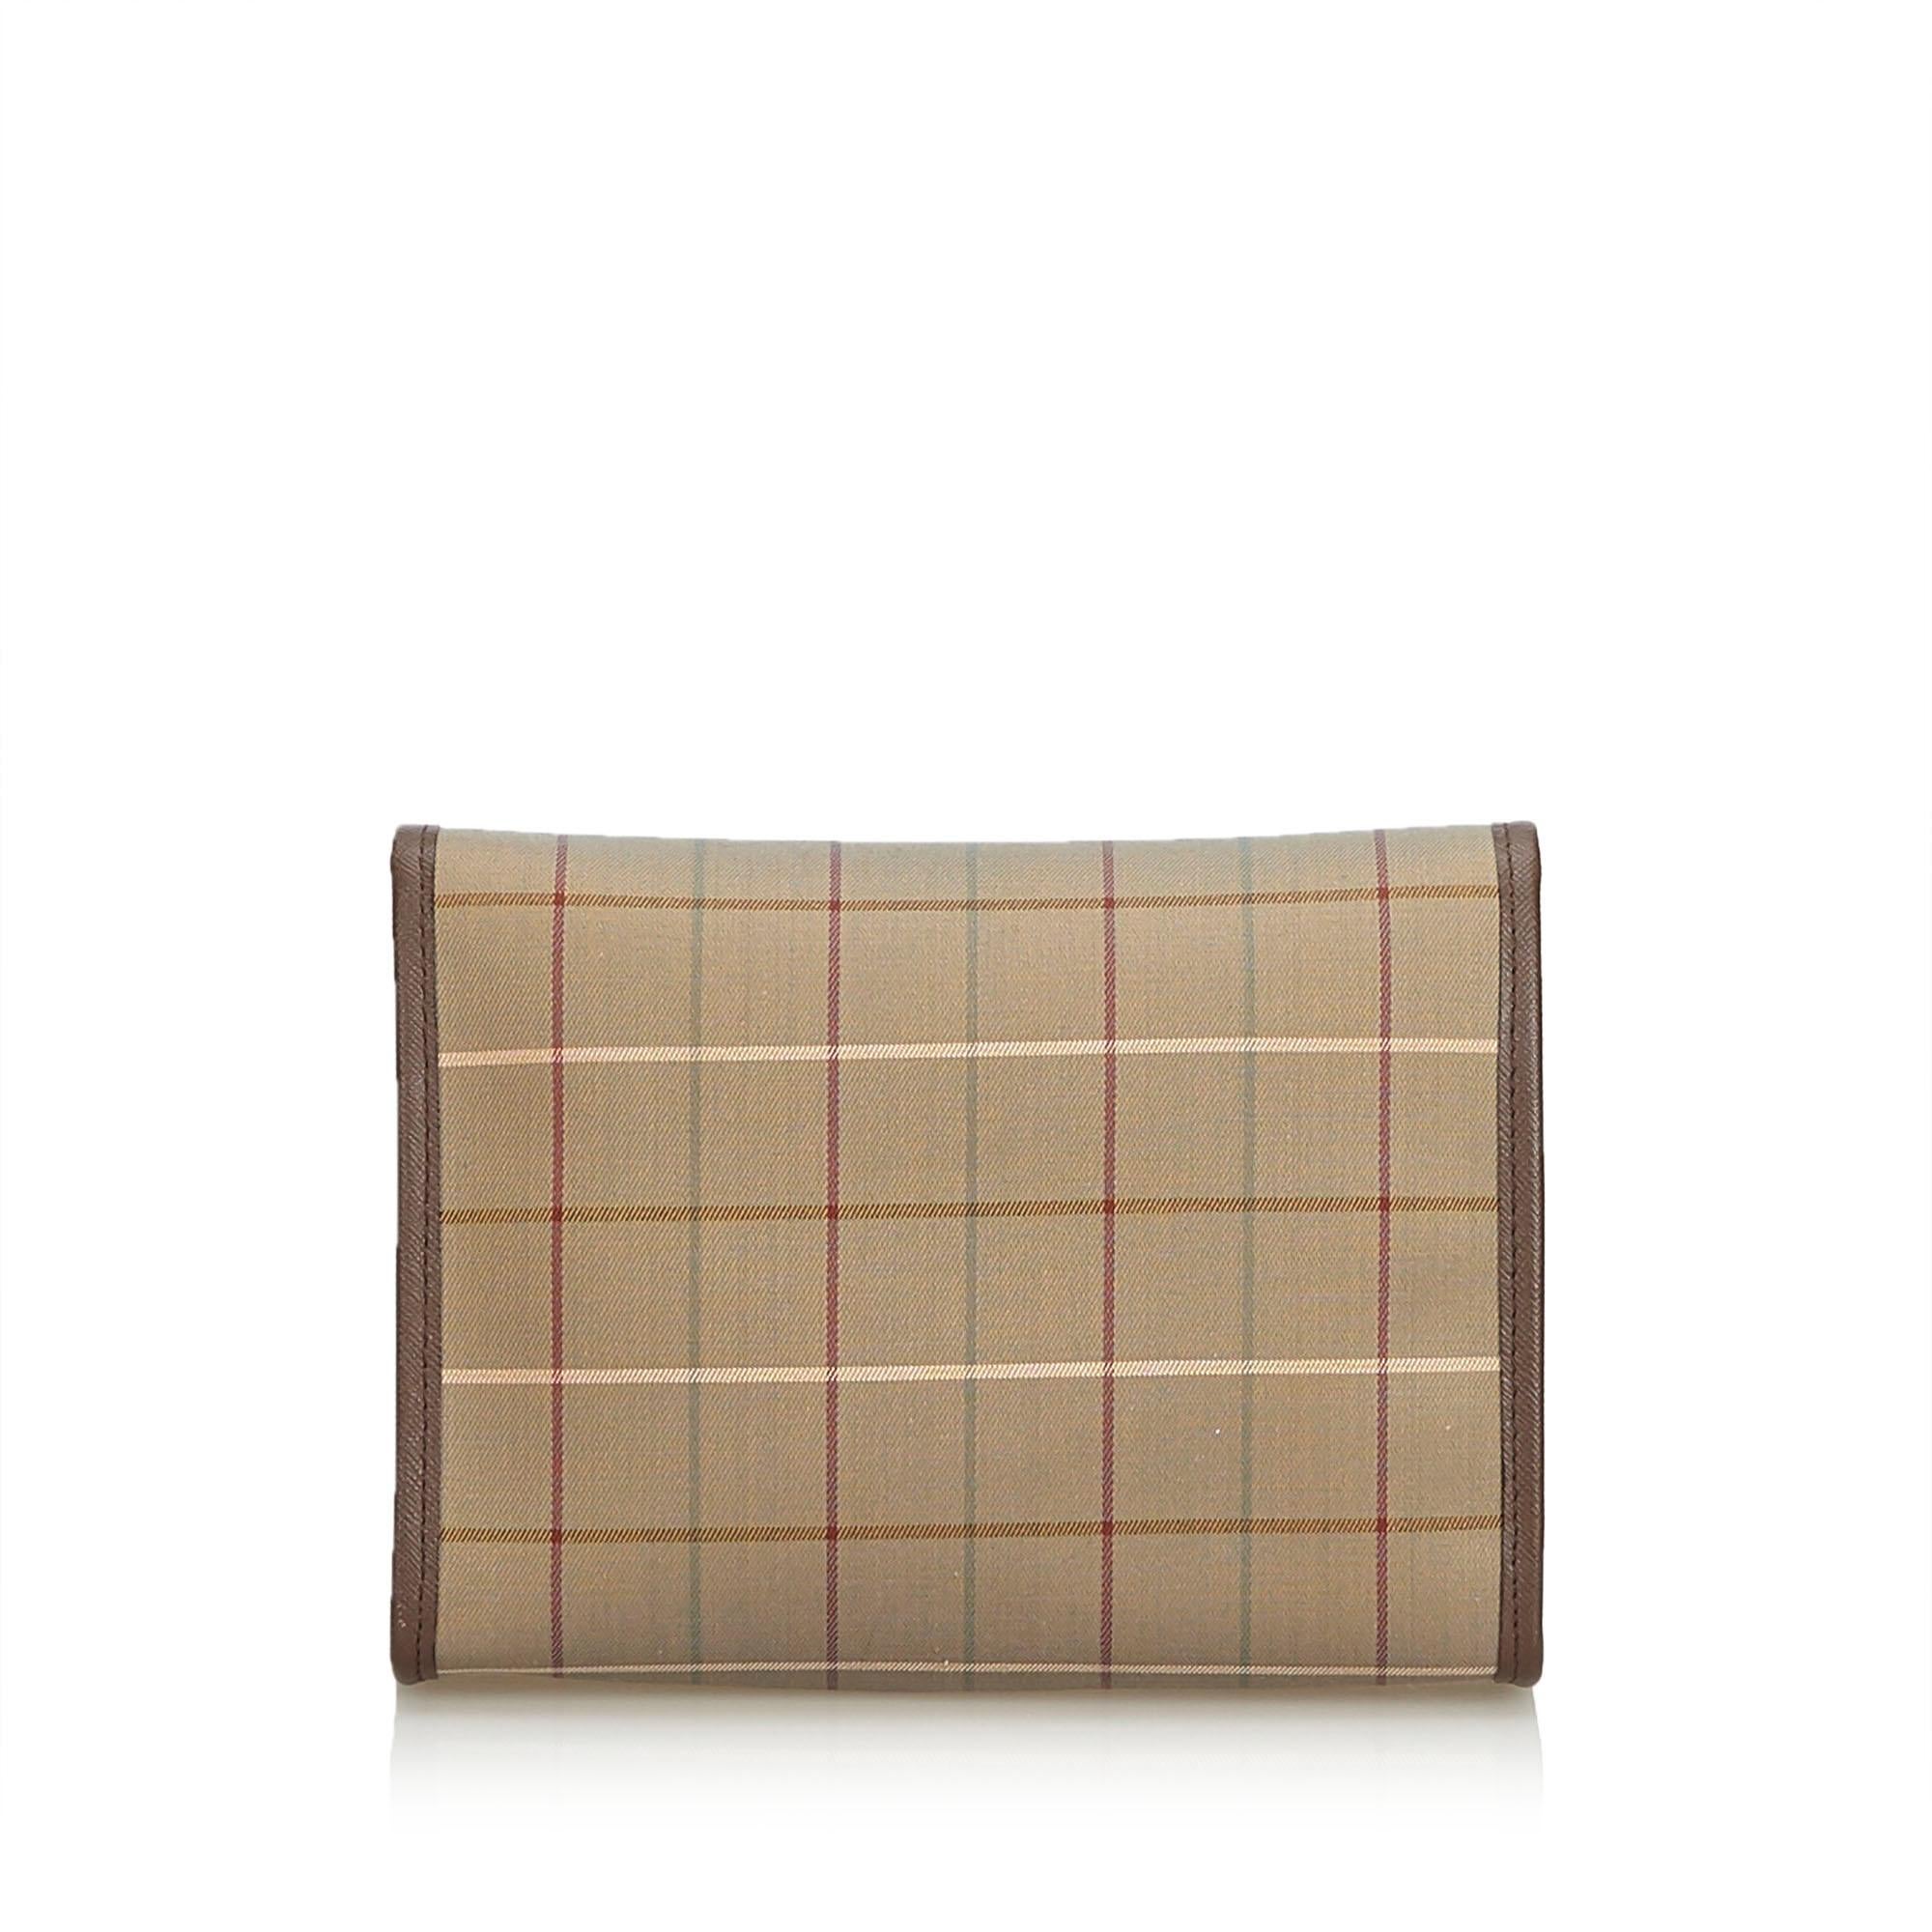 Vintage Authentic Burberry Brown Plaid Clutch Bag United Kingdom w Box SMALL  In Good Condition For Sale In Orlando, FL